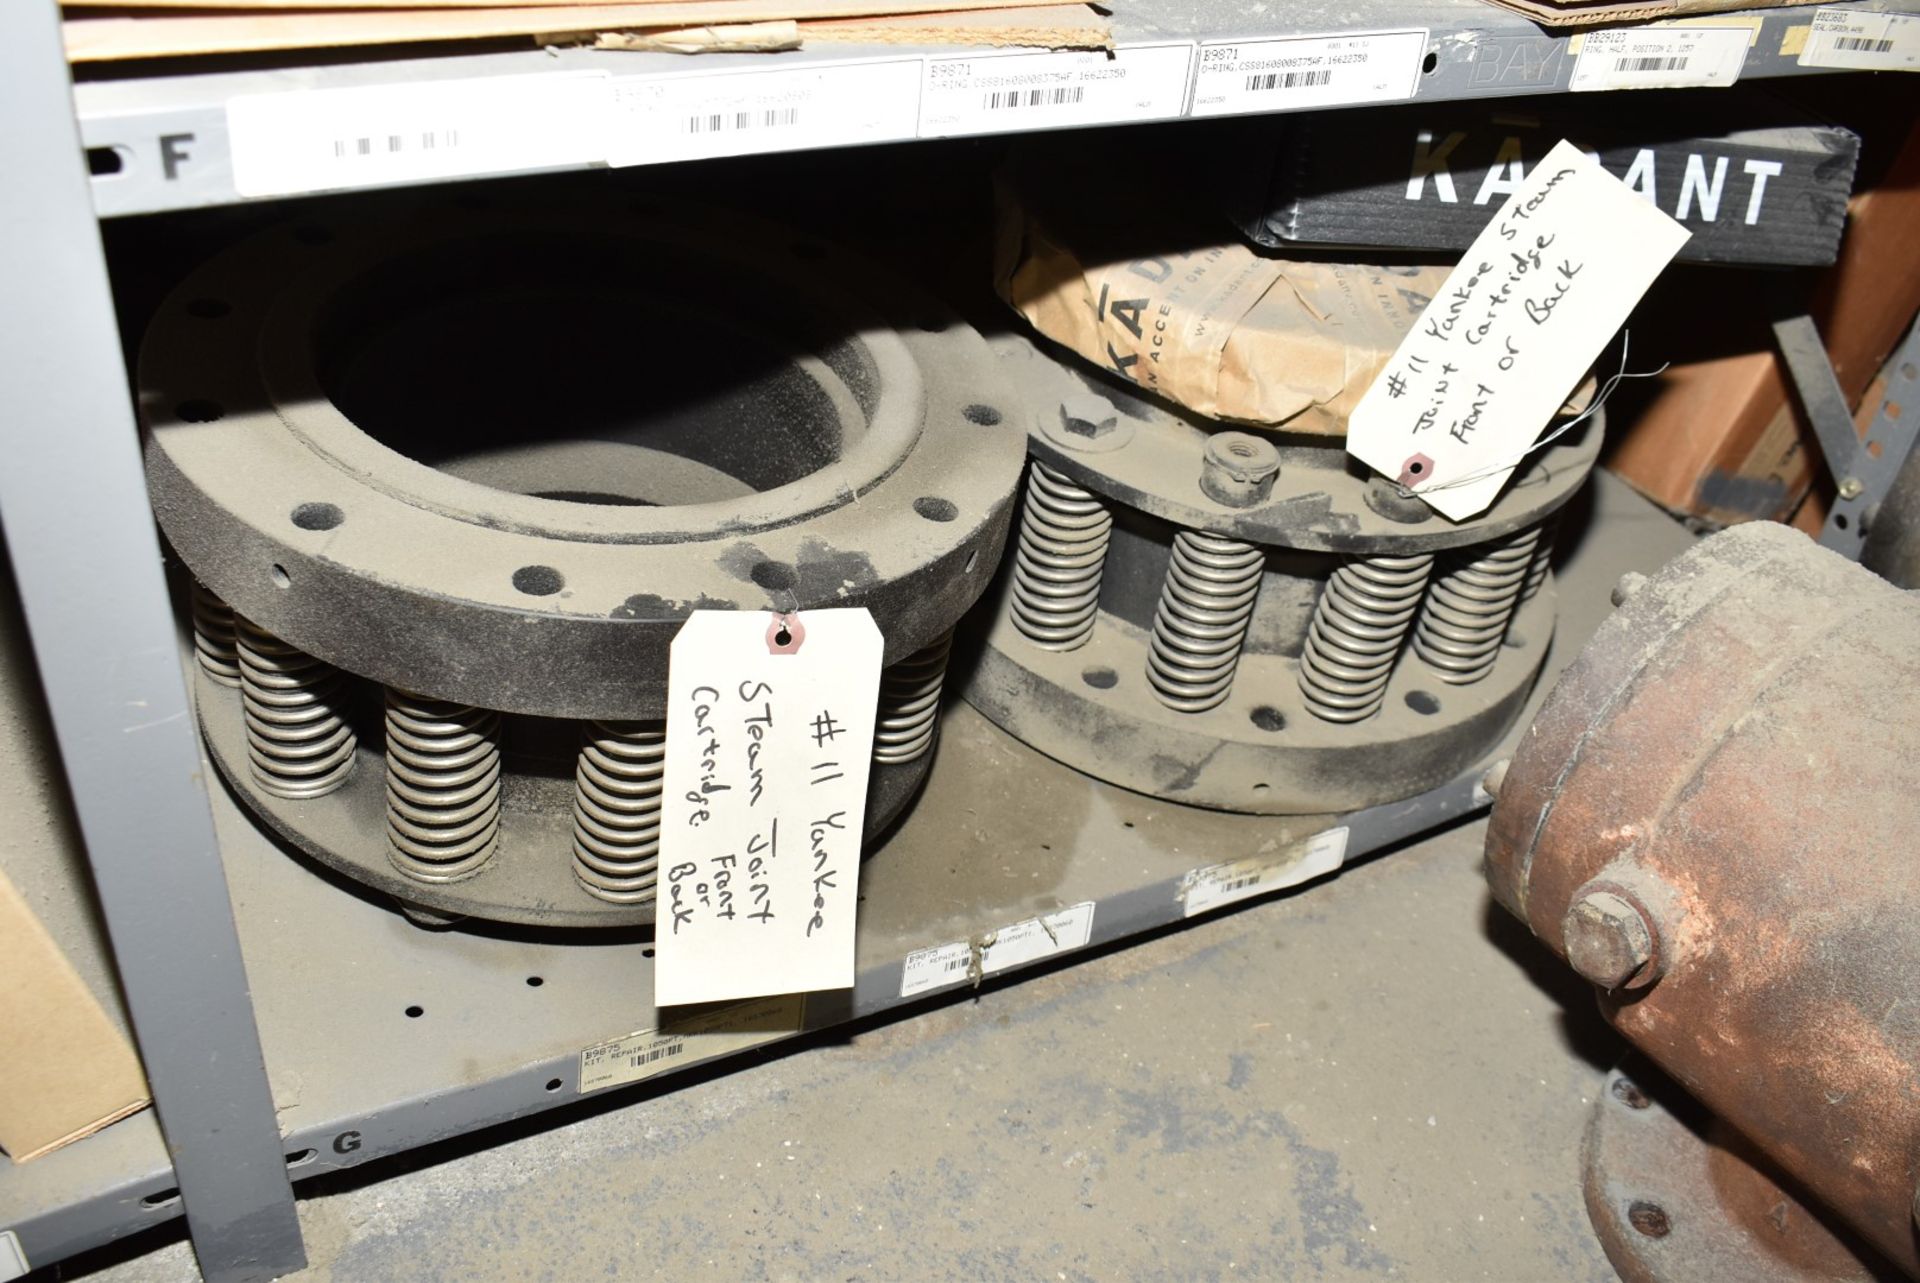 LOT/ CONTENTS OF SHELF - INCLUDING FLEX COUPLINGS, SLITTER BLADES, SPARE PARTS [RIGGING FEES FOR LOT - Image 5 of 6